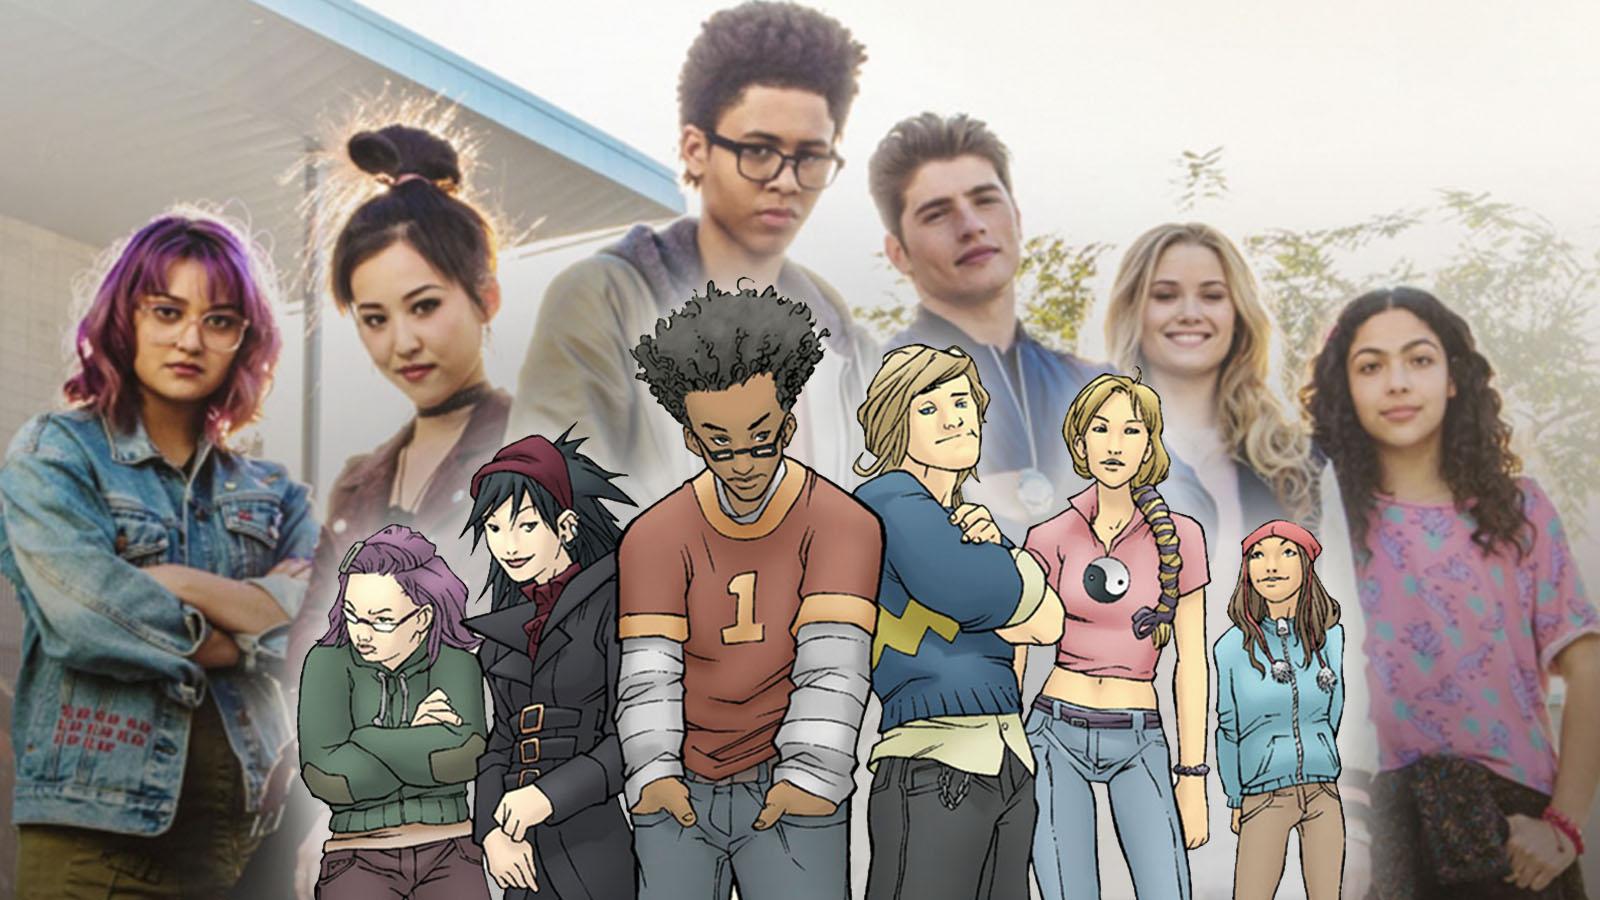 Hulu's Runaways may actually do justice to the brilliant